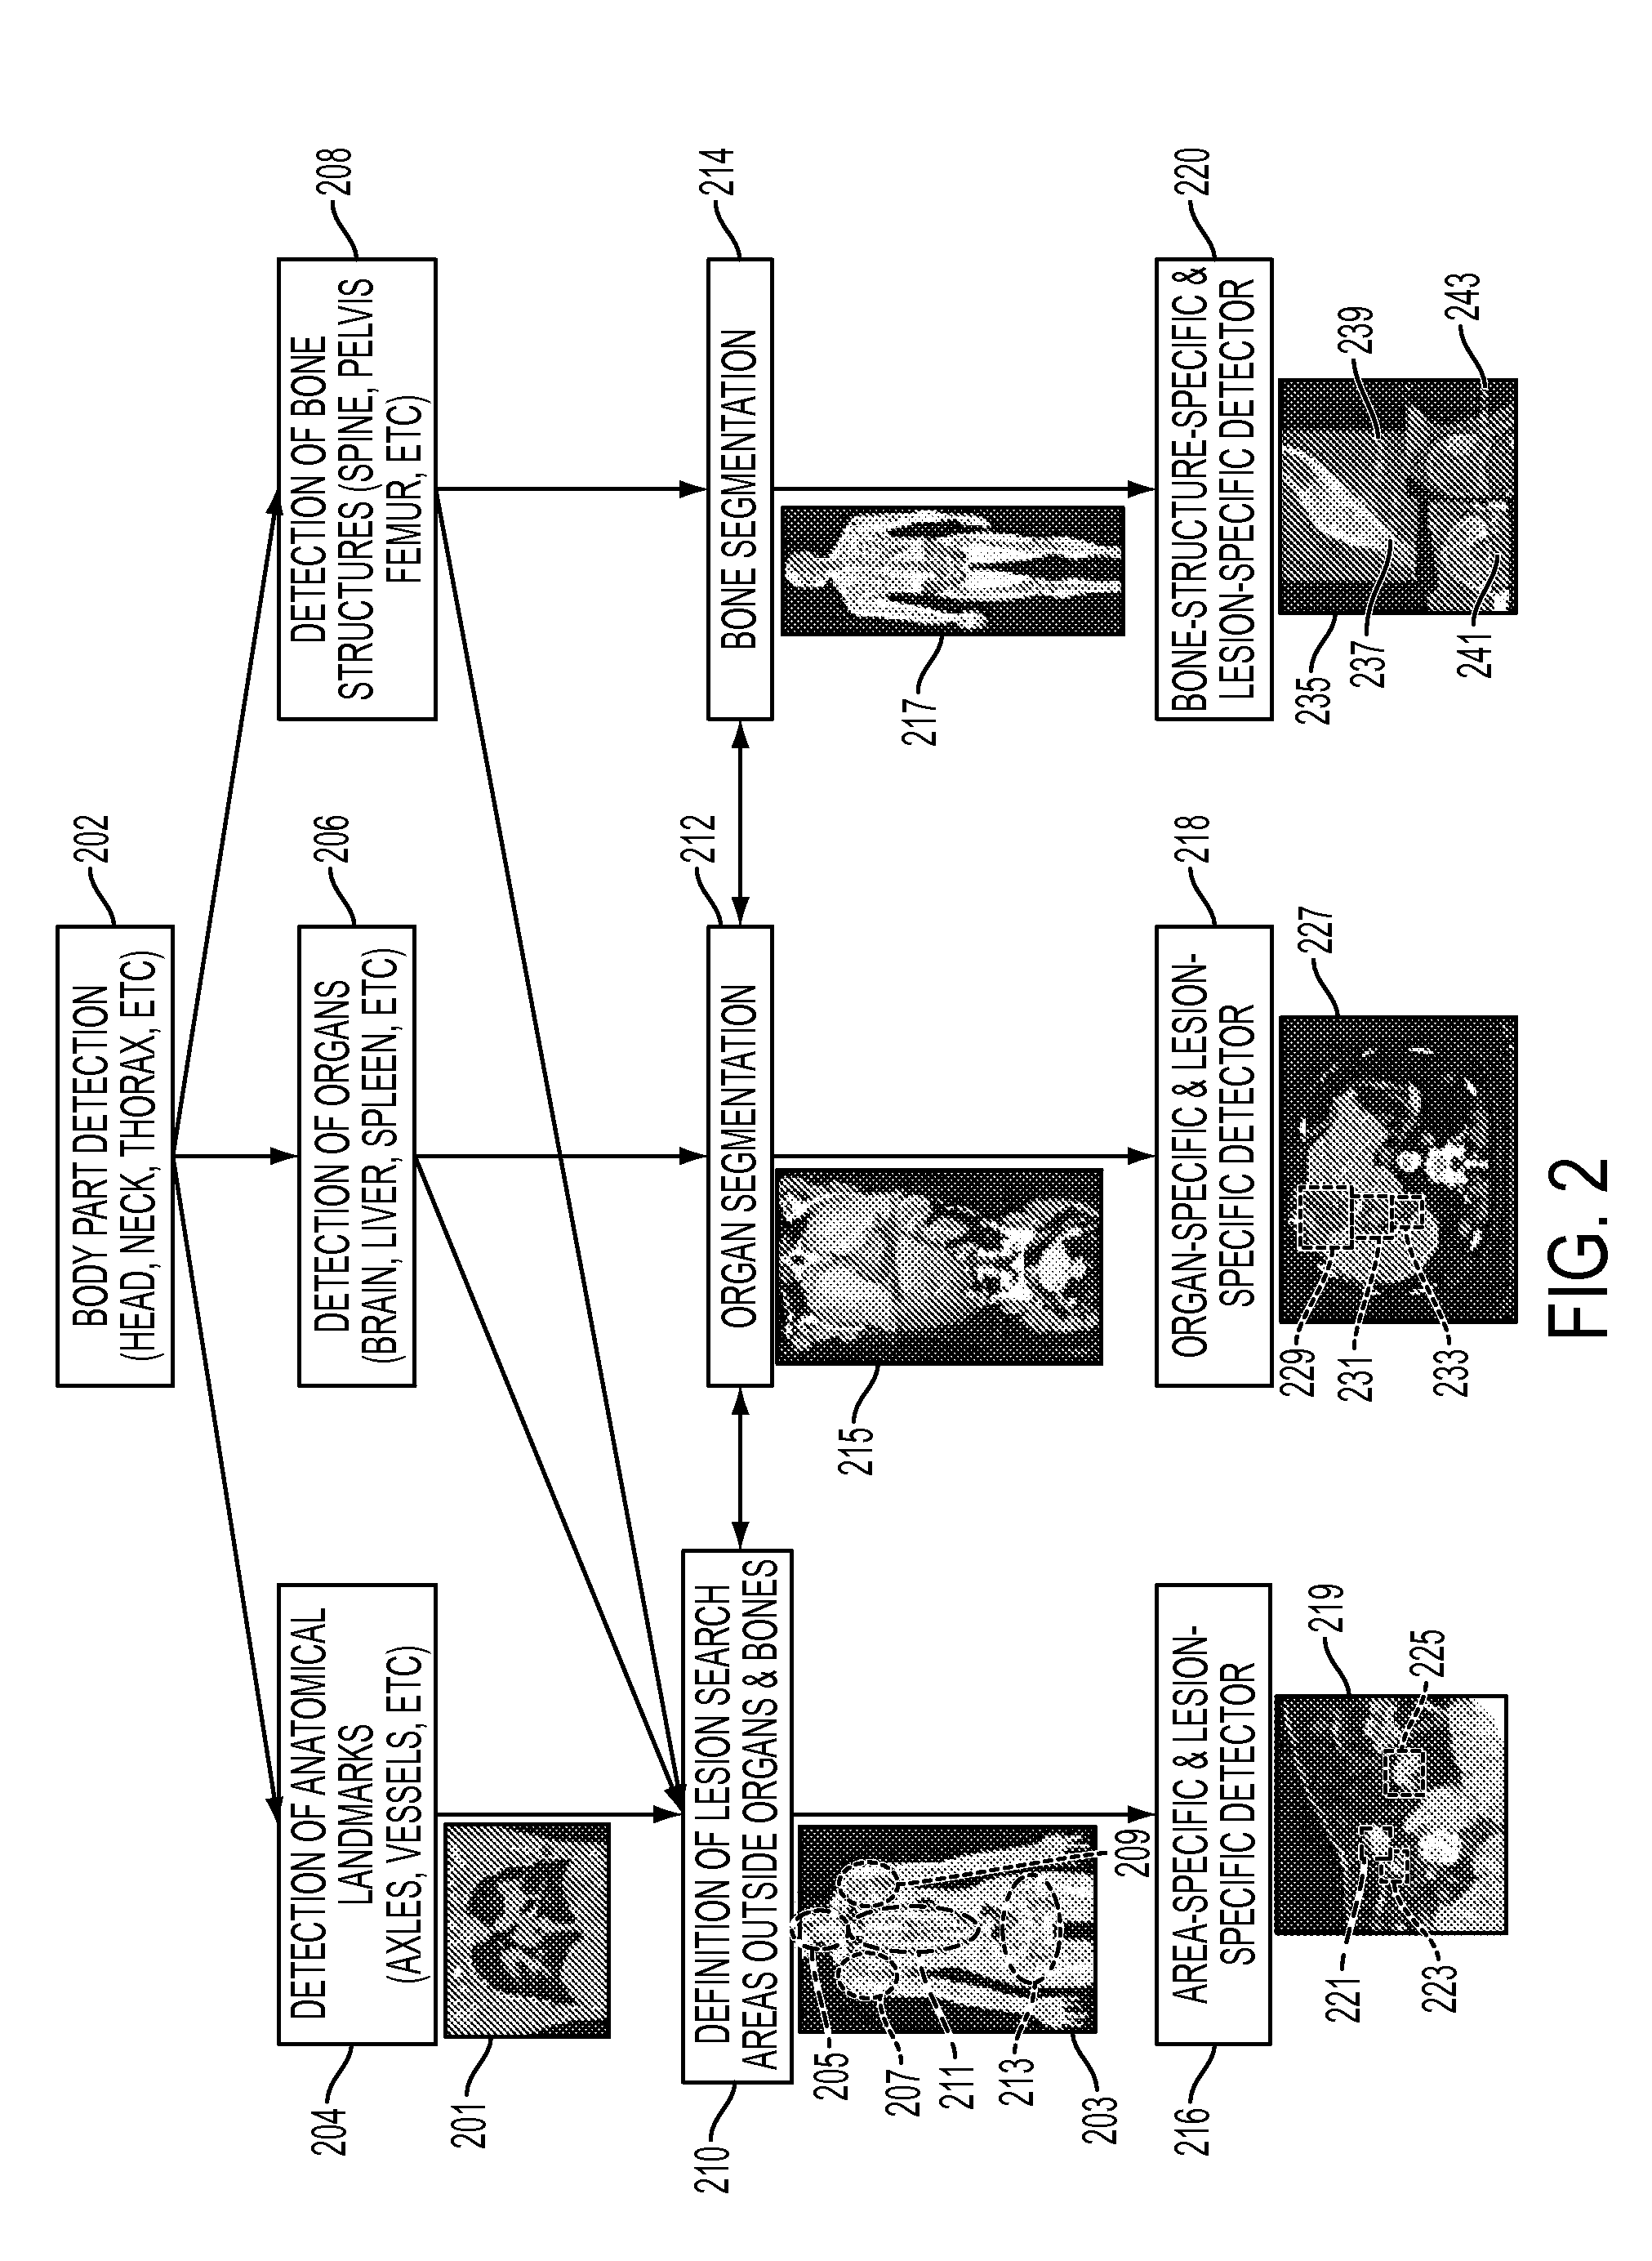 Method and System for Database-Guided Lesion Detection and Assessment